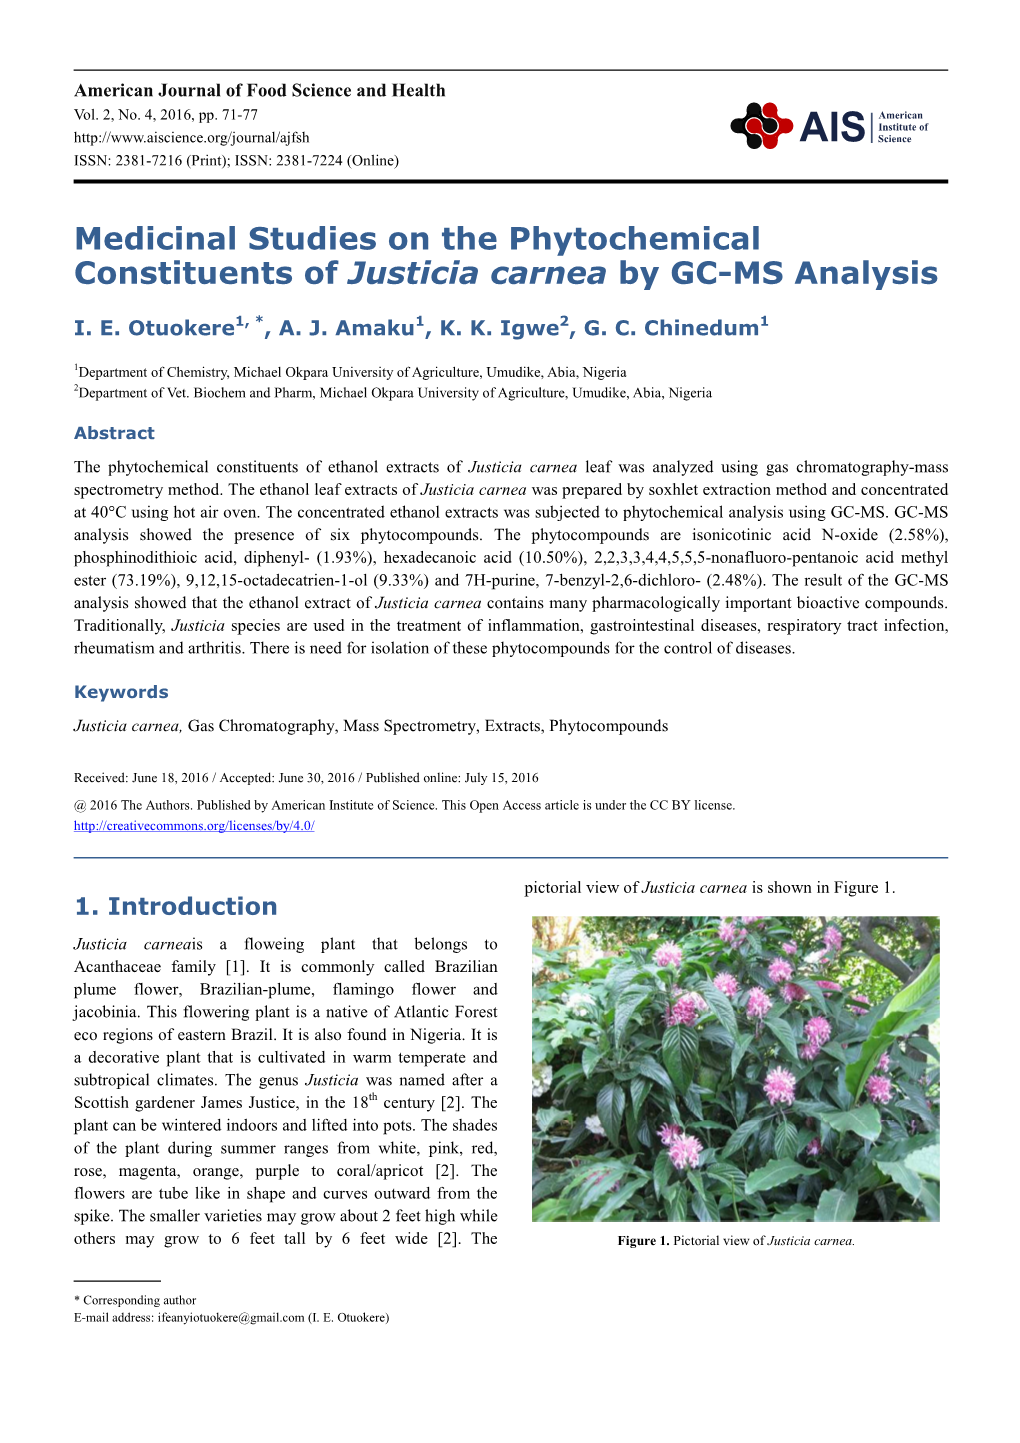 Medicinal Studies on the Phytochemical Constituents of Justicia Carnea by GC-MS Analysis